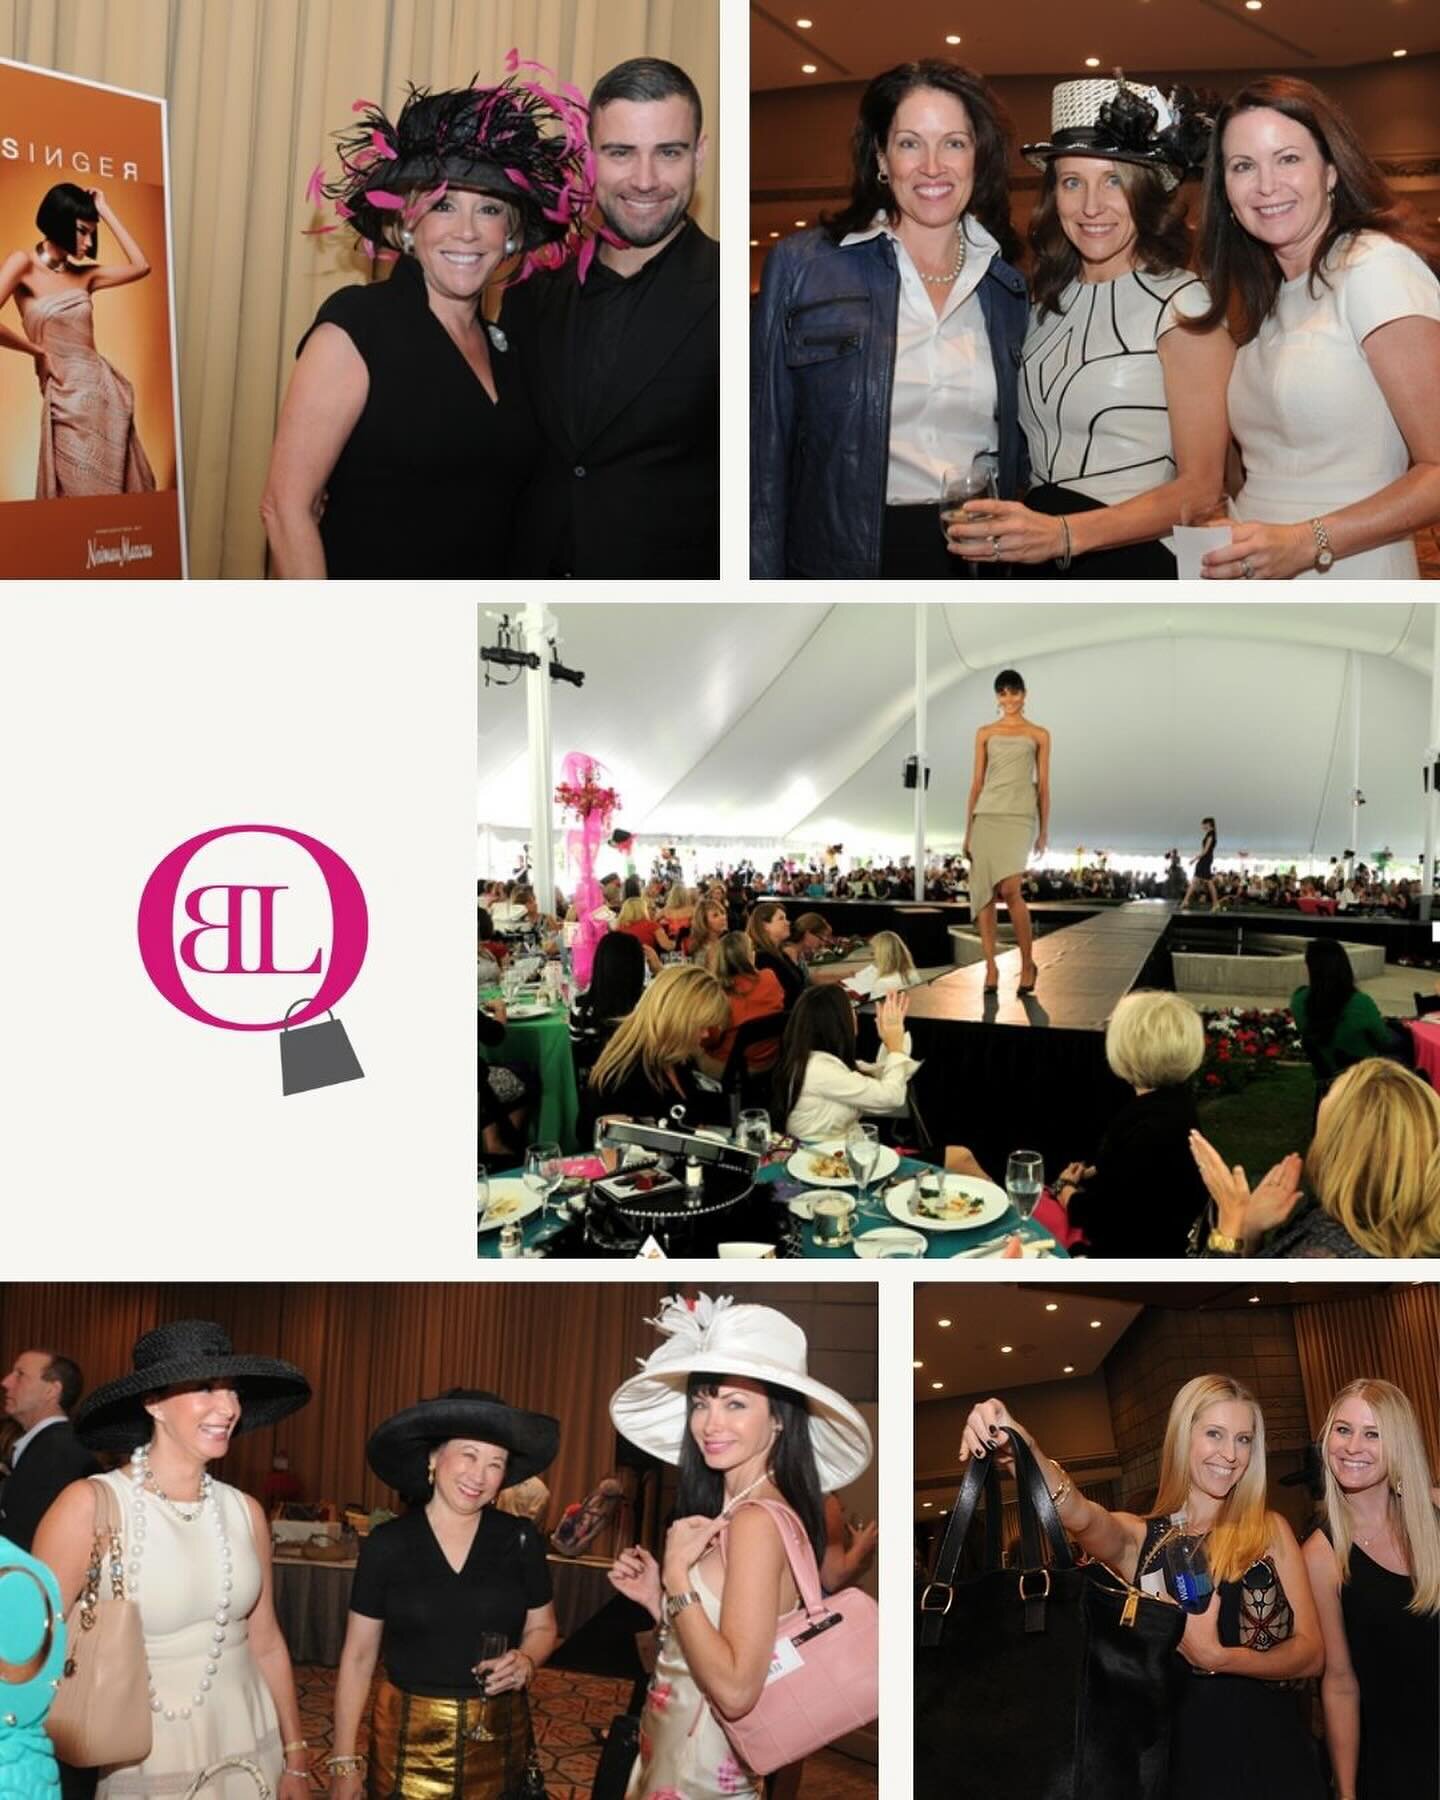 Let&rsquo;s do something good together 🤍

We love looking back at these snapshots from @homewardboundaz Old Bags Luncheon and finding joy in this unforgettable time of fellowship and style, for a great cause!

Interested in doing something fresh and